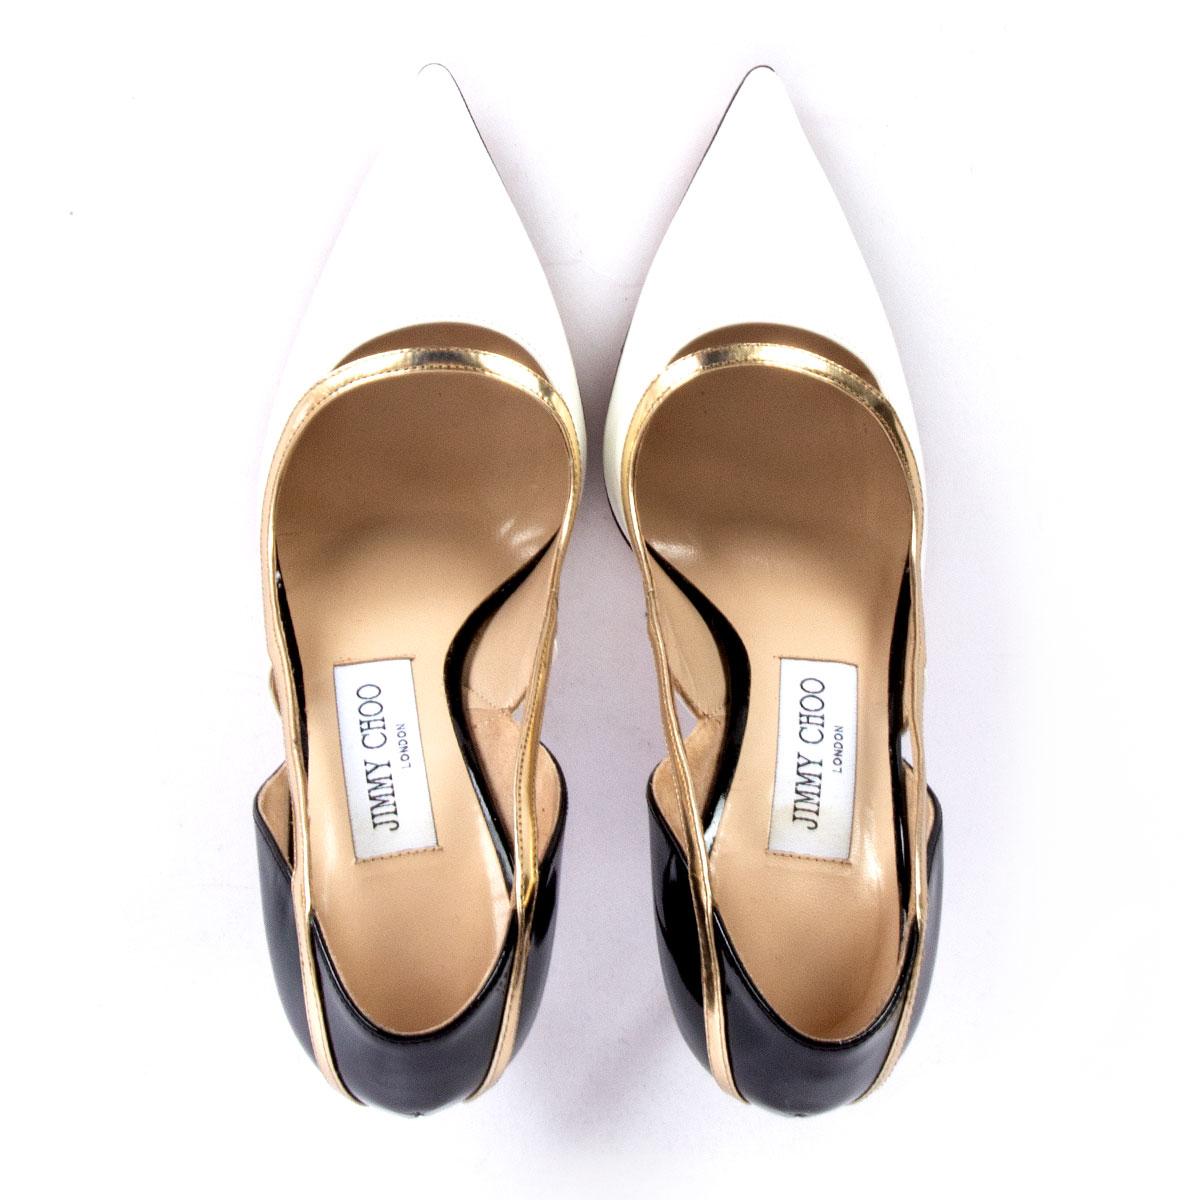 JIMMY CHOO white black gold patent leather VIPER Pumps Shoes 36 1